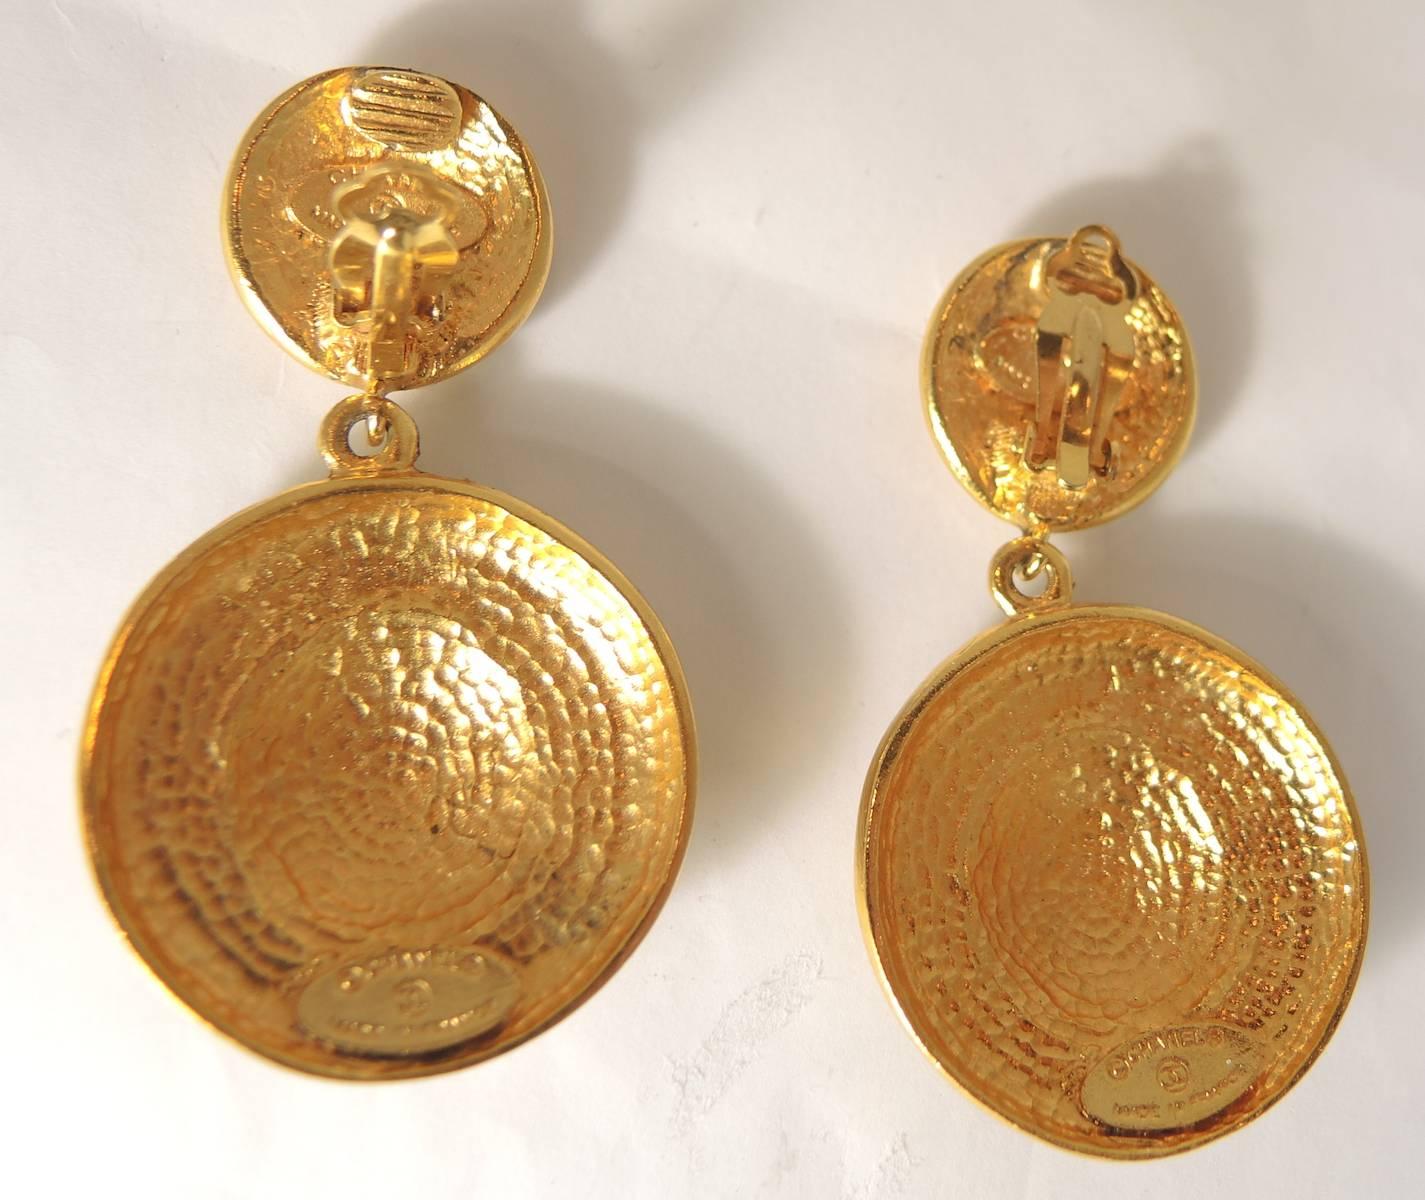 These Chanel round drop disk earrings have a small button top and a larger round disk at the bottom with the monogrammed letter “X” all over them. They are in a gold tone setting and measure 2-1/2” x 1-1/4”. These clip earrings are signed “Chanel”